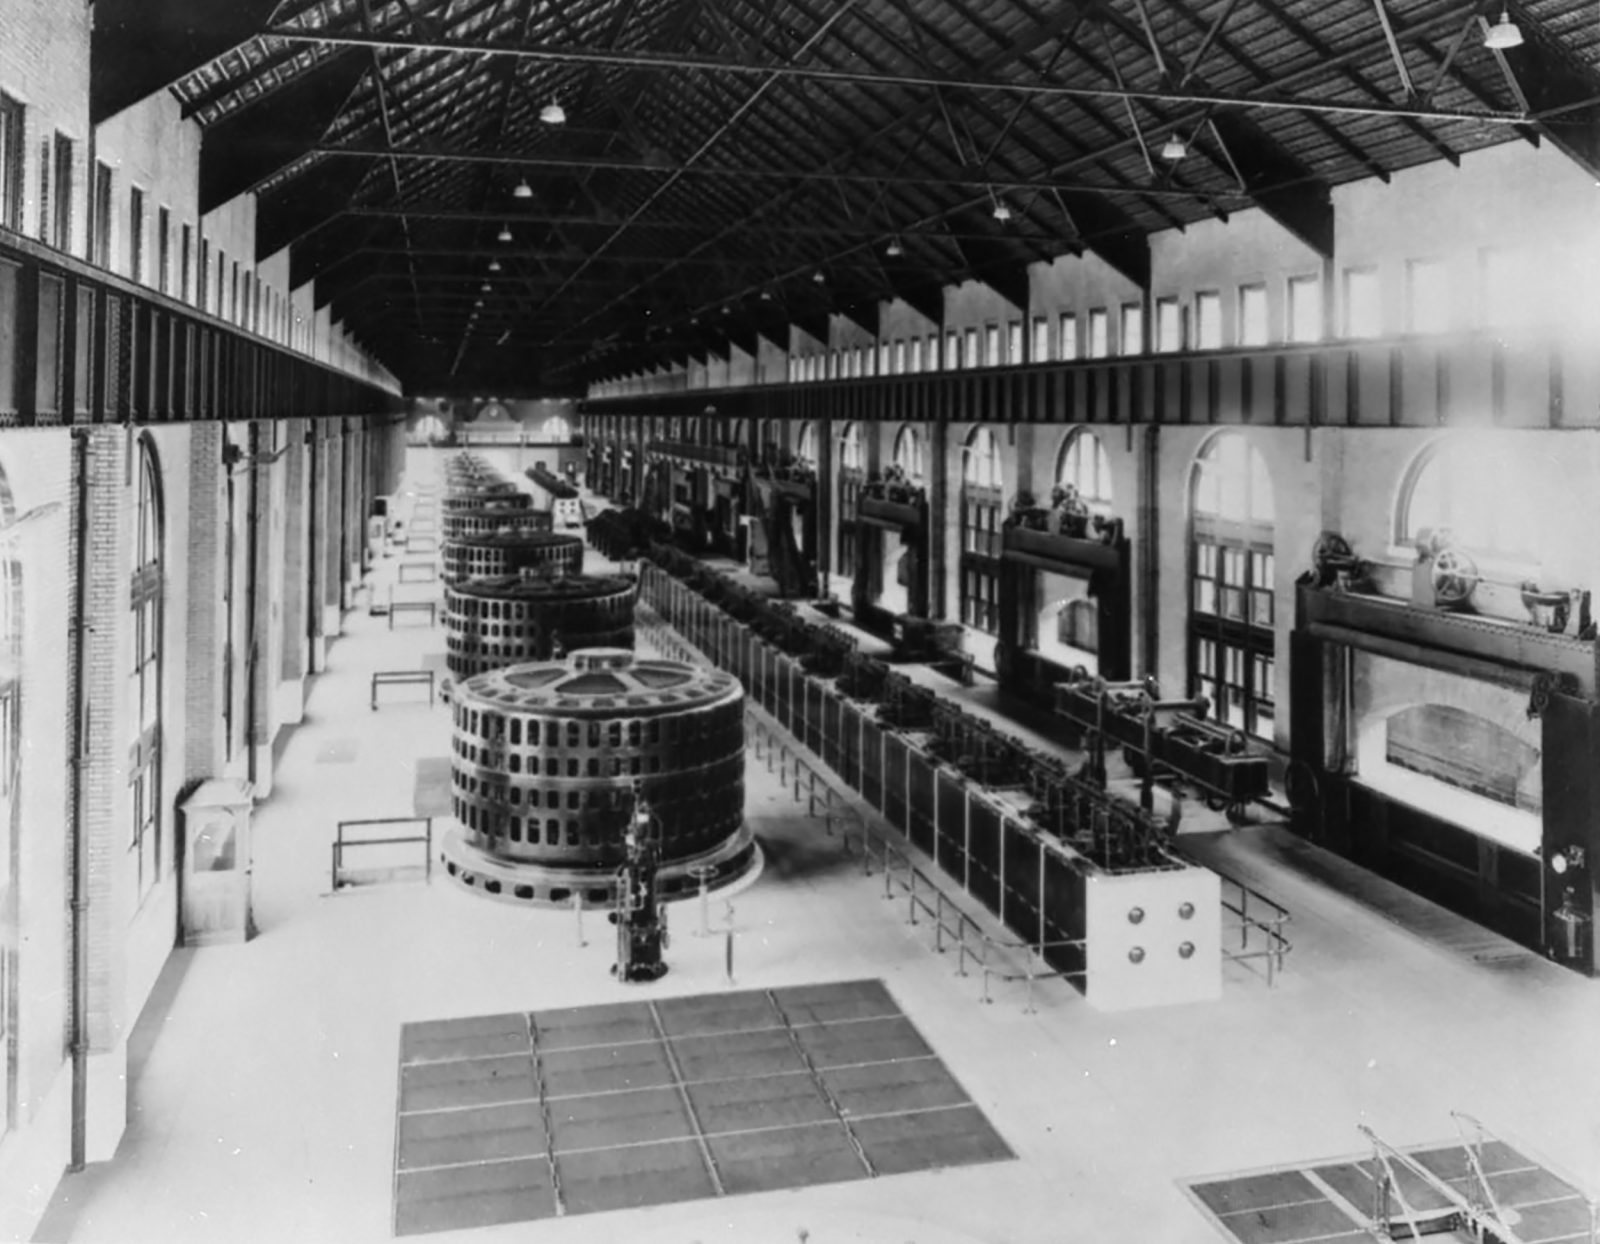 A black and white photo of power plant generators.